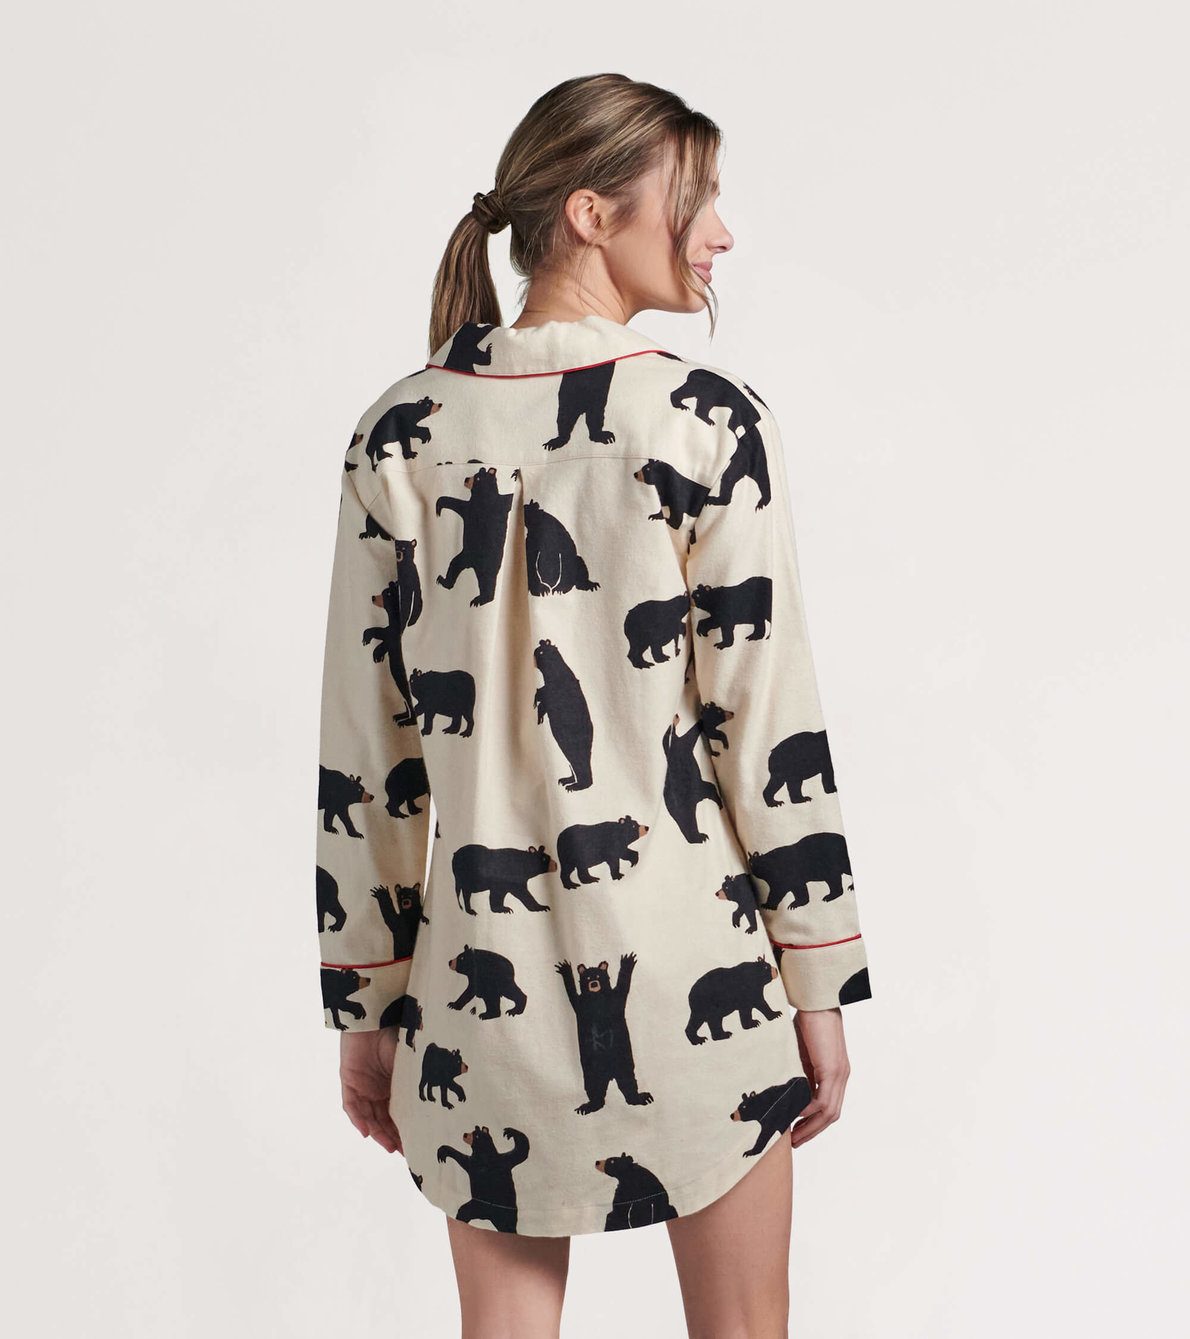 View larger image of Black Bears Women's Flannel Nightdress